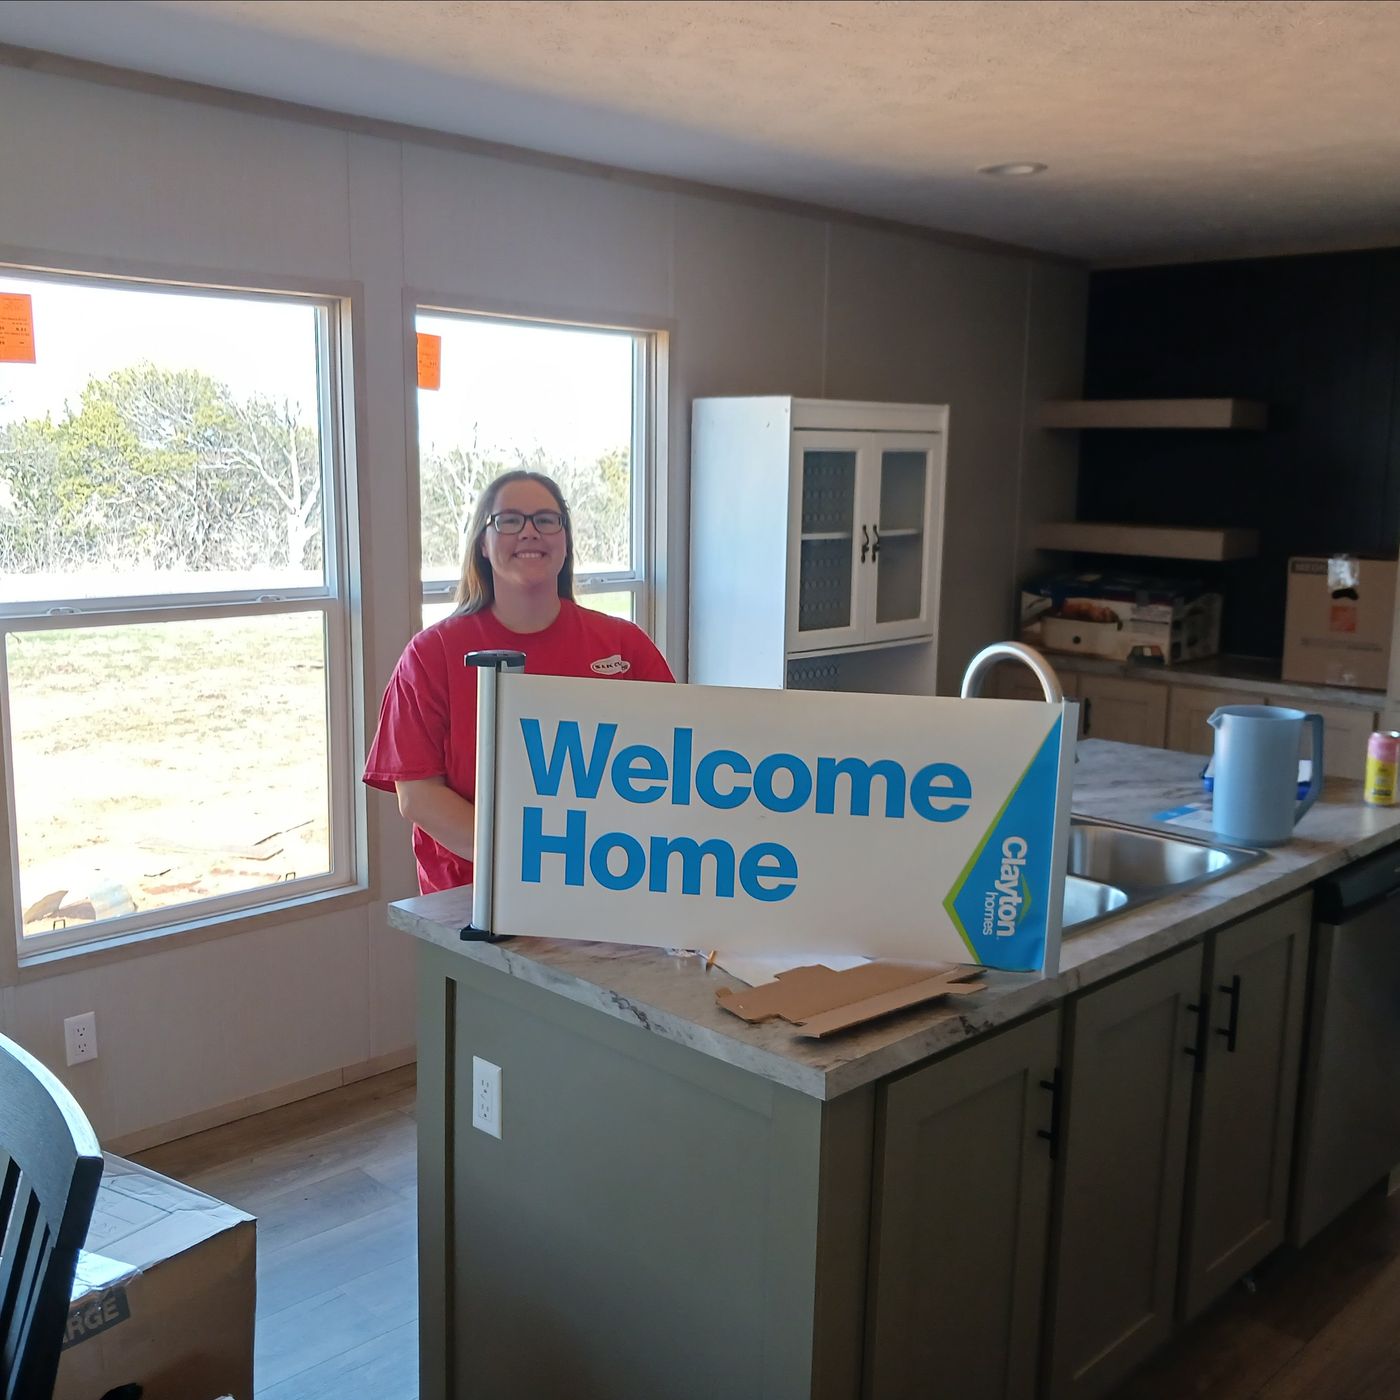 MEGAN H. welcome home image